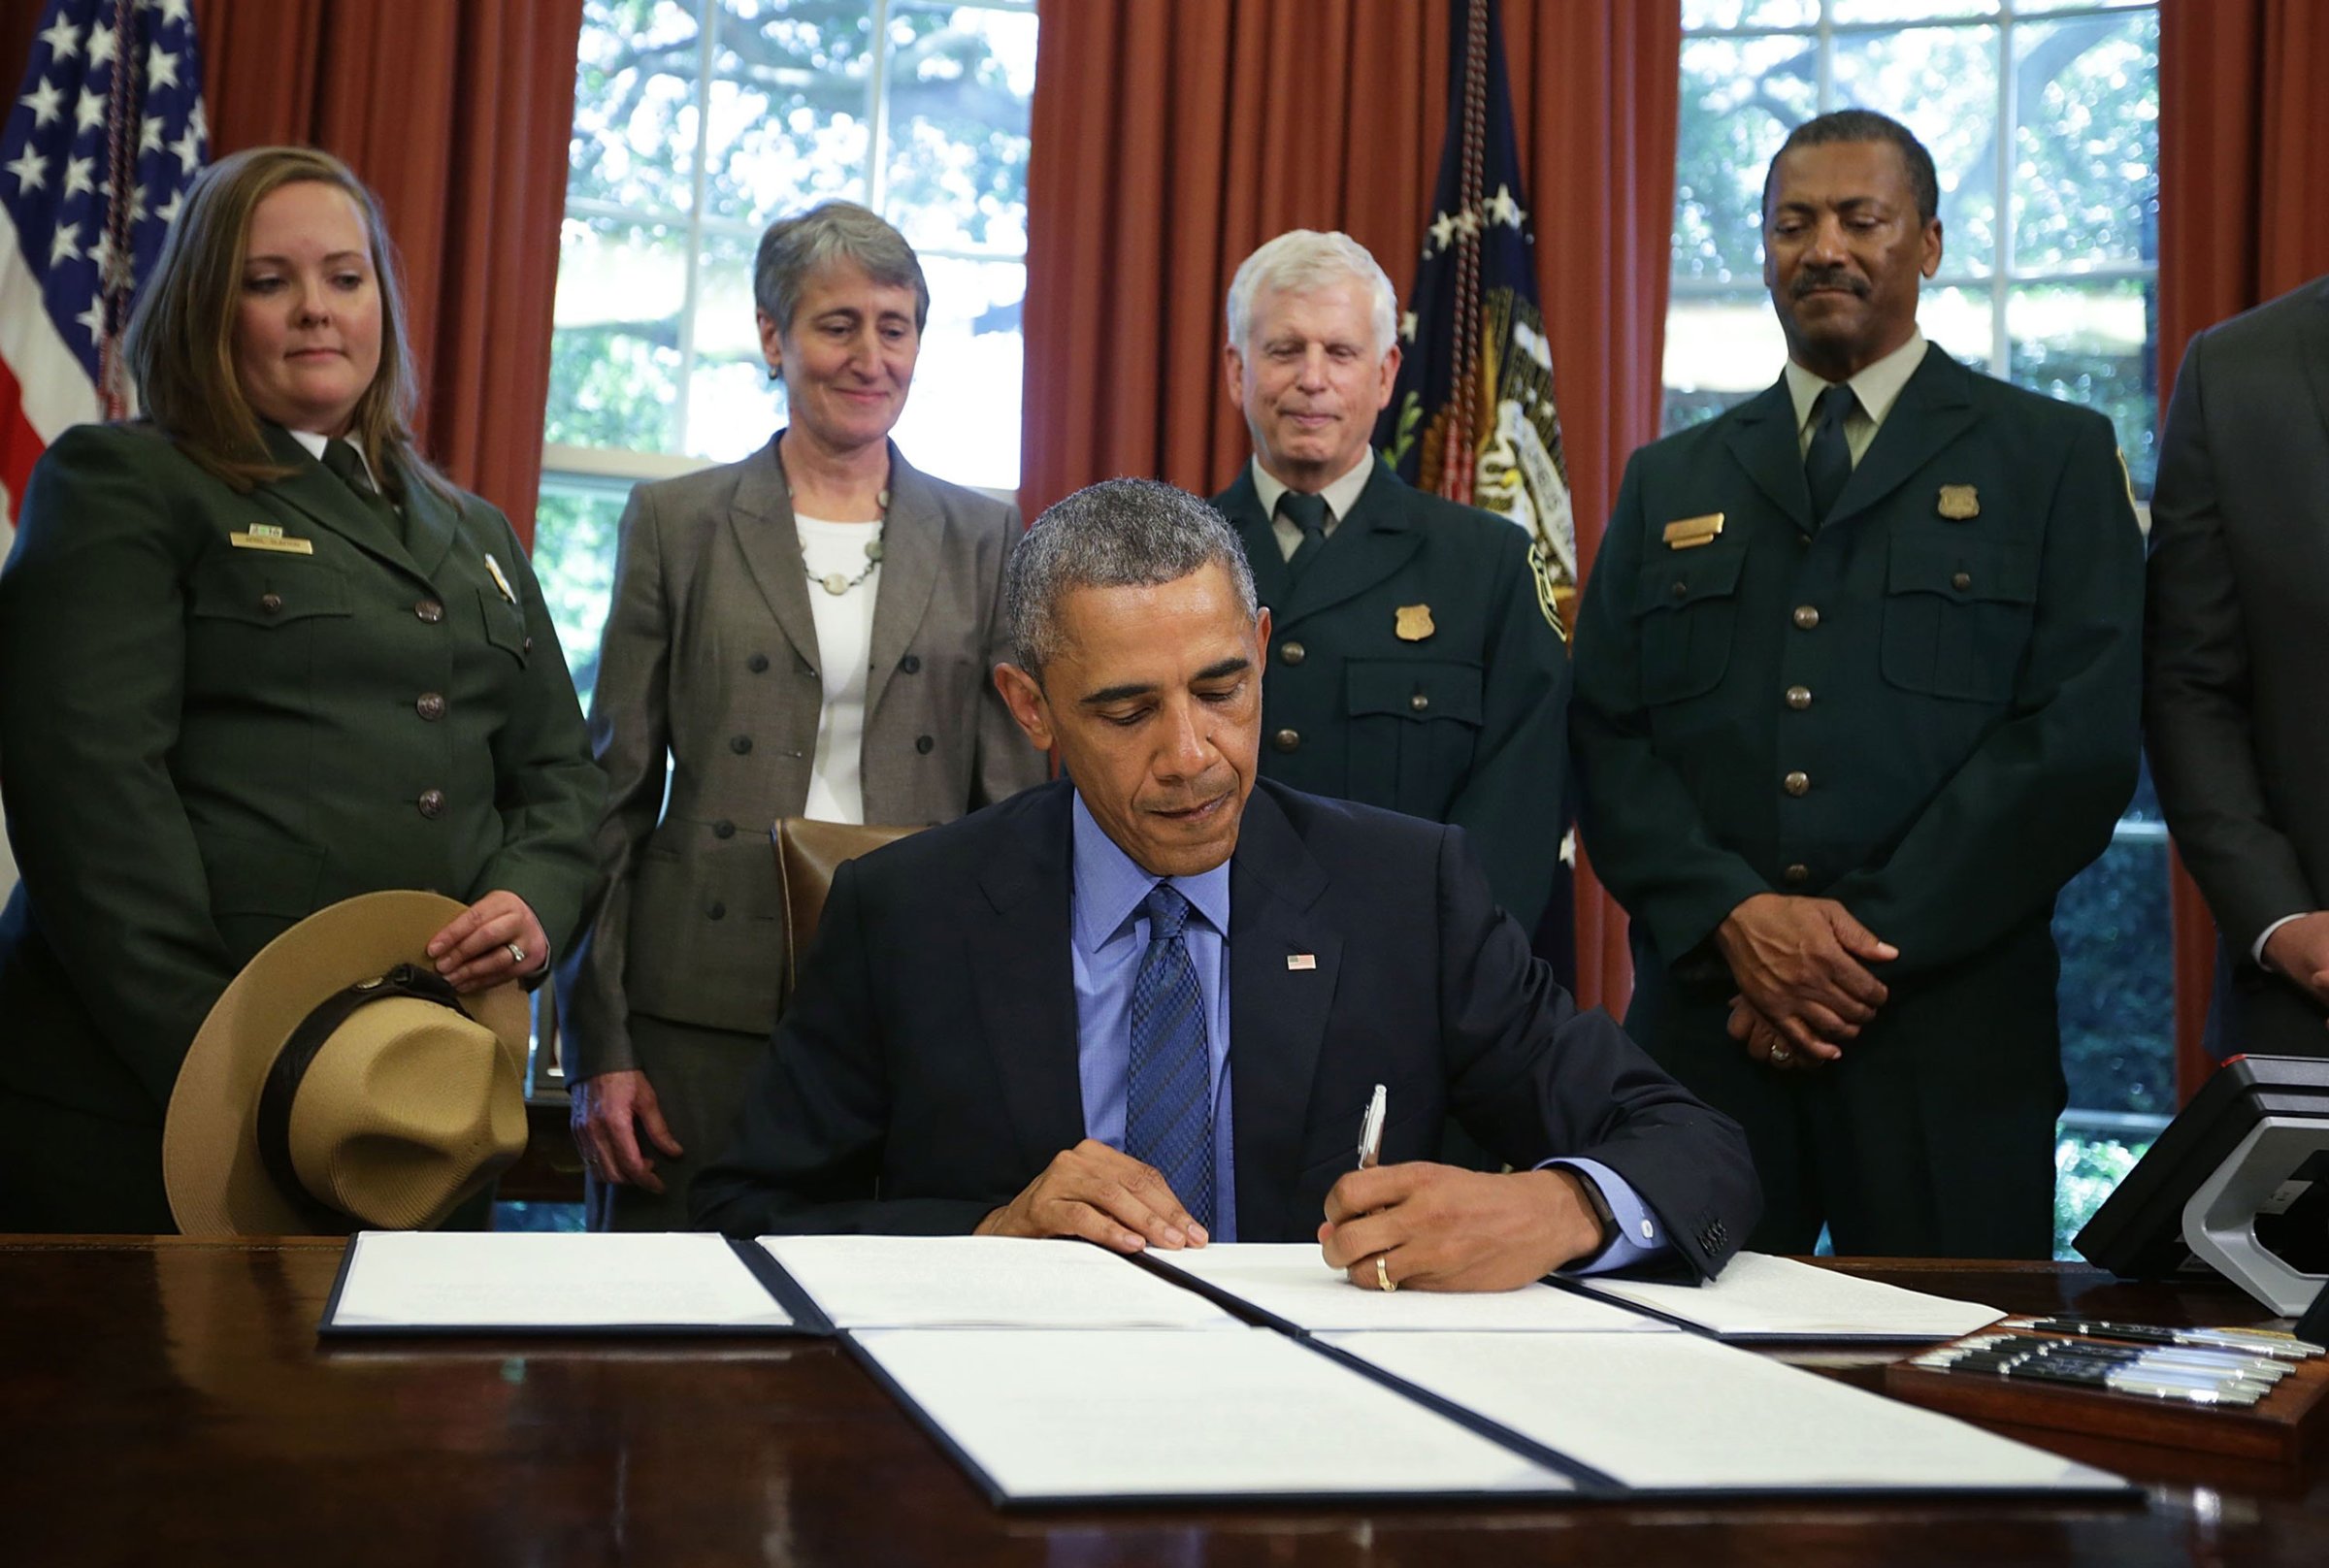 President Barack Obama signs proclamations to designate three new national monuments as Secretary of Interior Sally Jewell (2nd L) looks on in the Oval Office of the White House July 10, 2015 in Washington, DC. President Obama has designated three new national monuments of Berryessa Snow Mountain in California; Waco Mammoth in Texas; and the Basin and Range in Nevada. (Photo by Alex Wong/Getty Images)